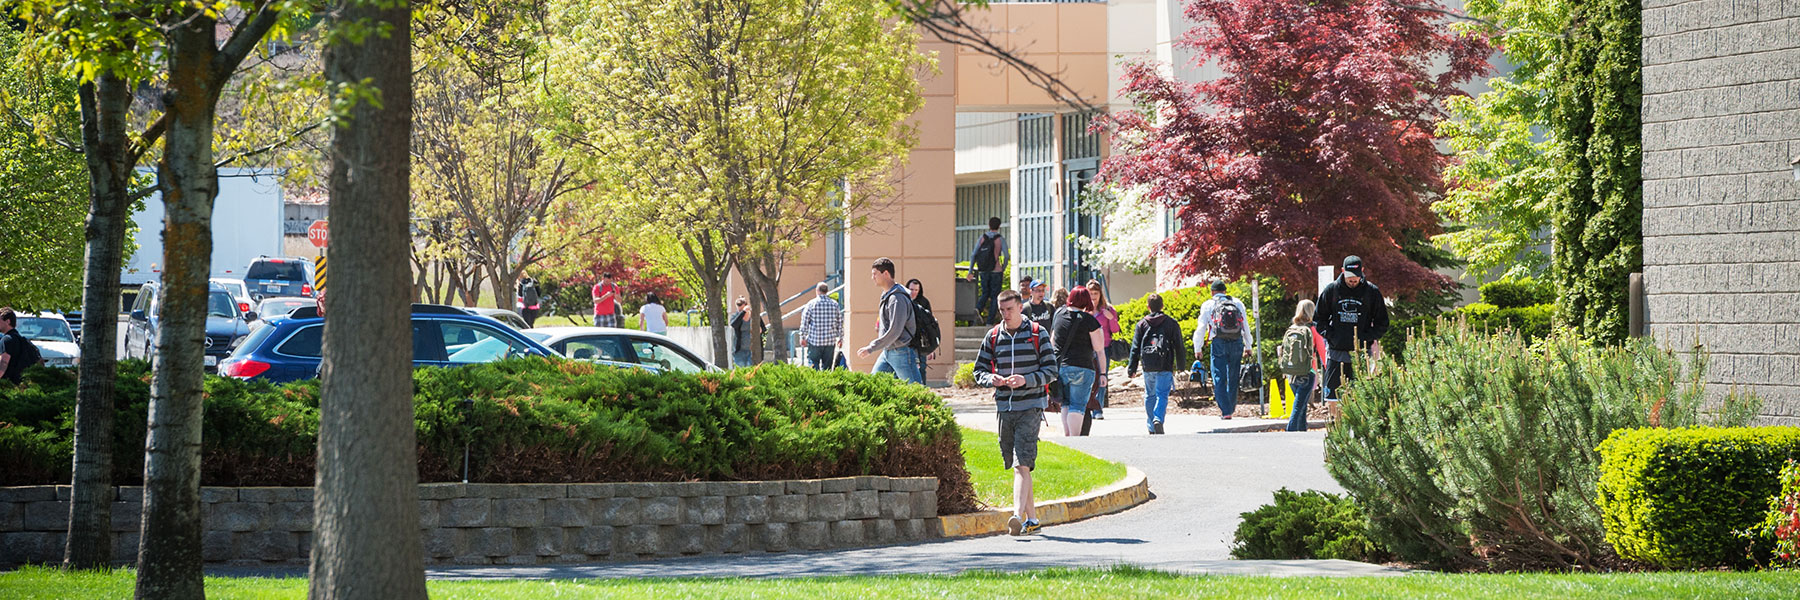 Students walking around outdoors on the SCC campus